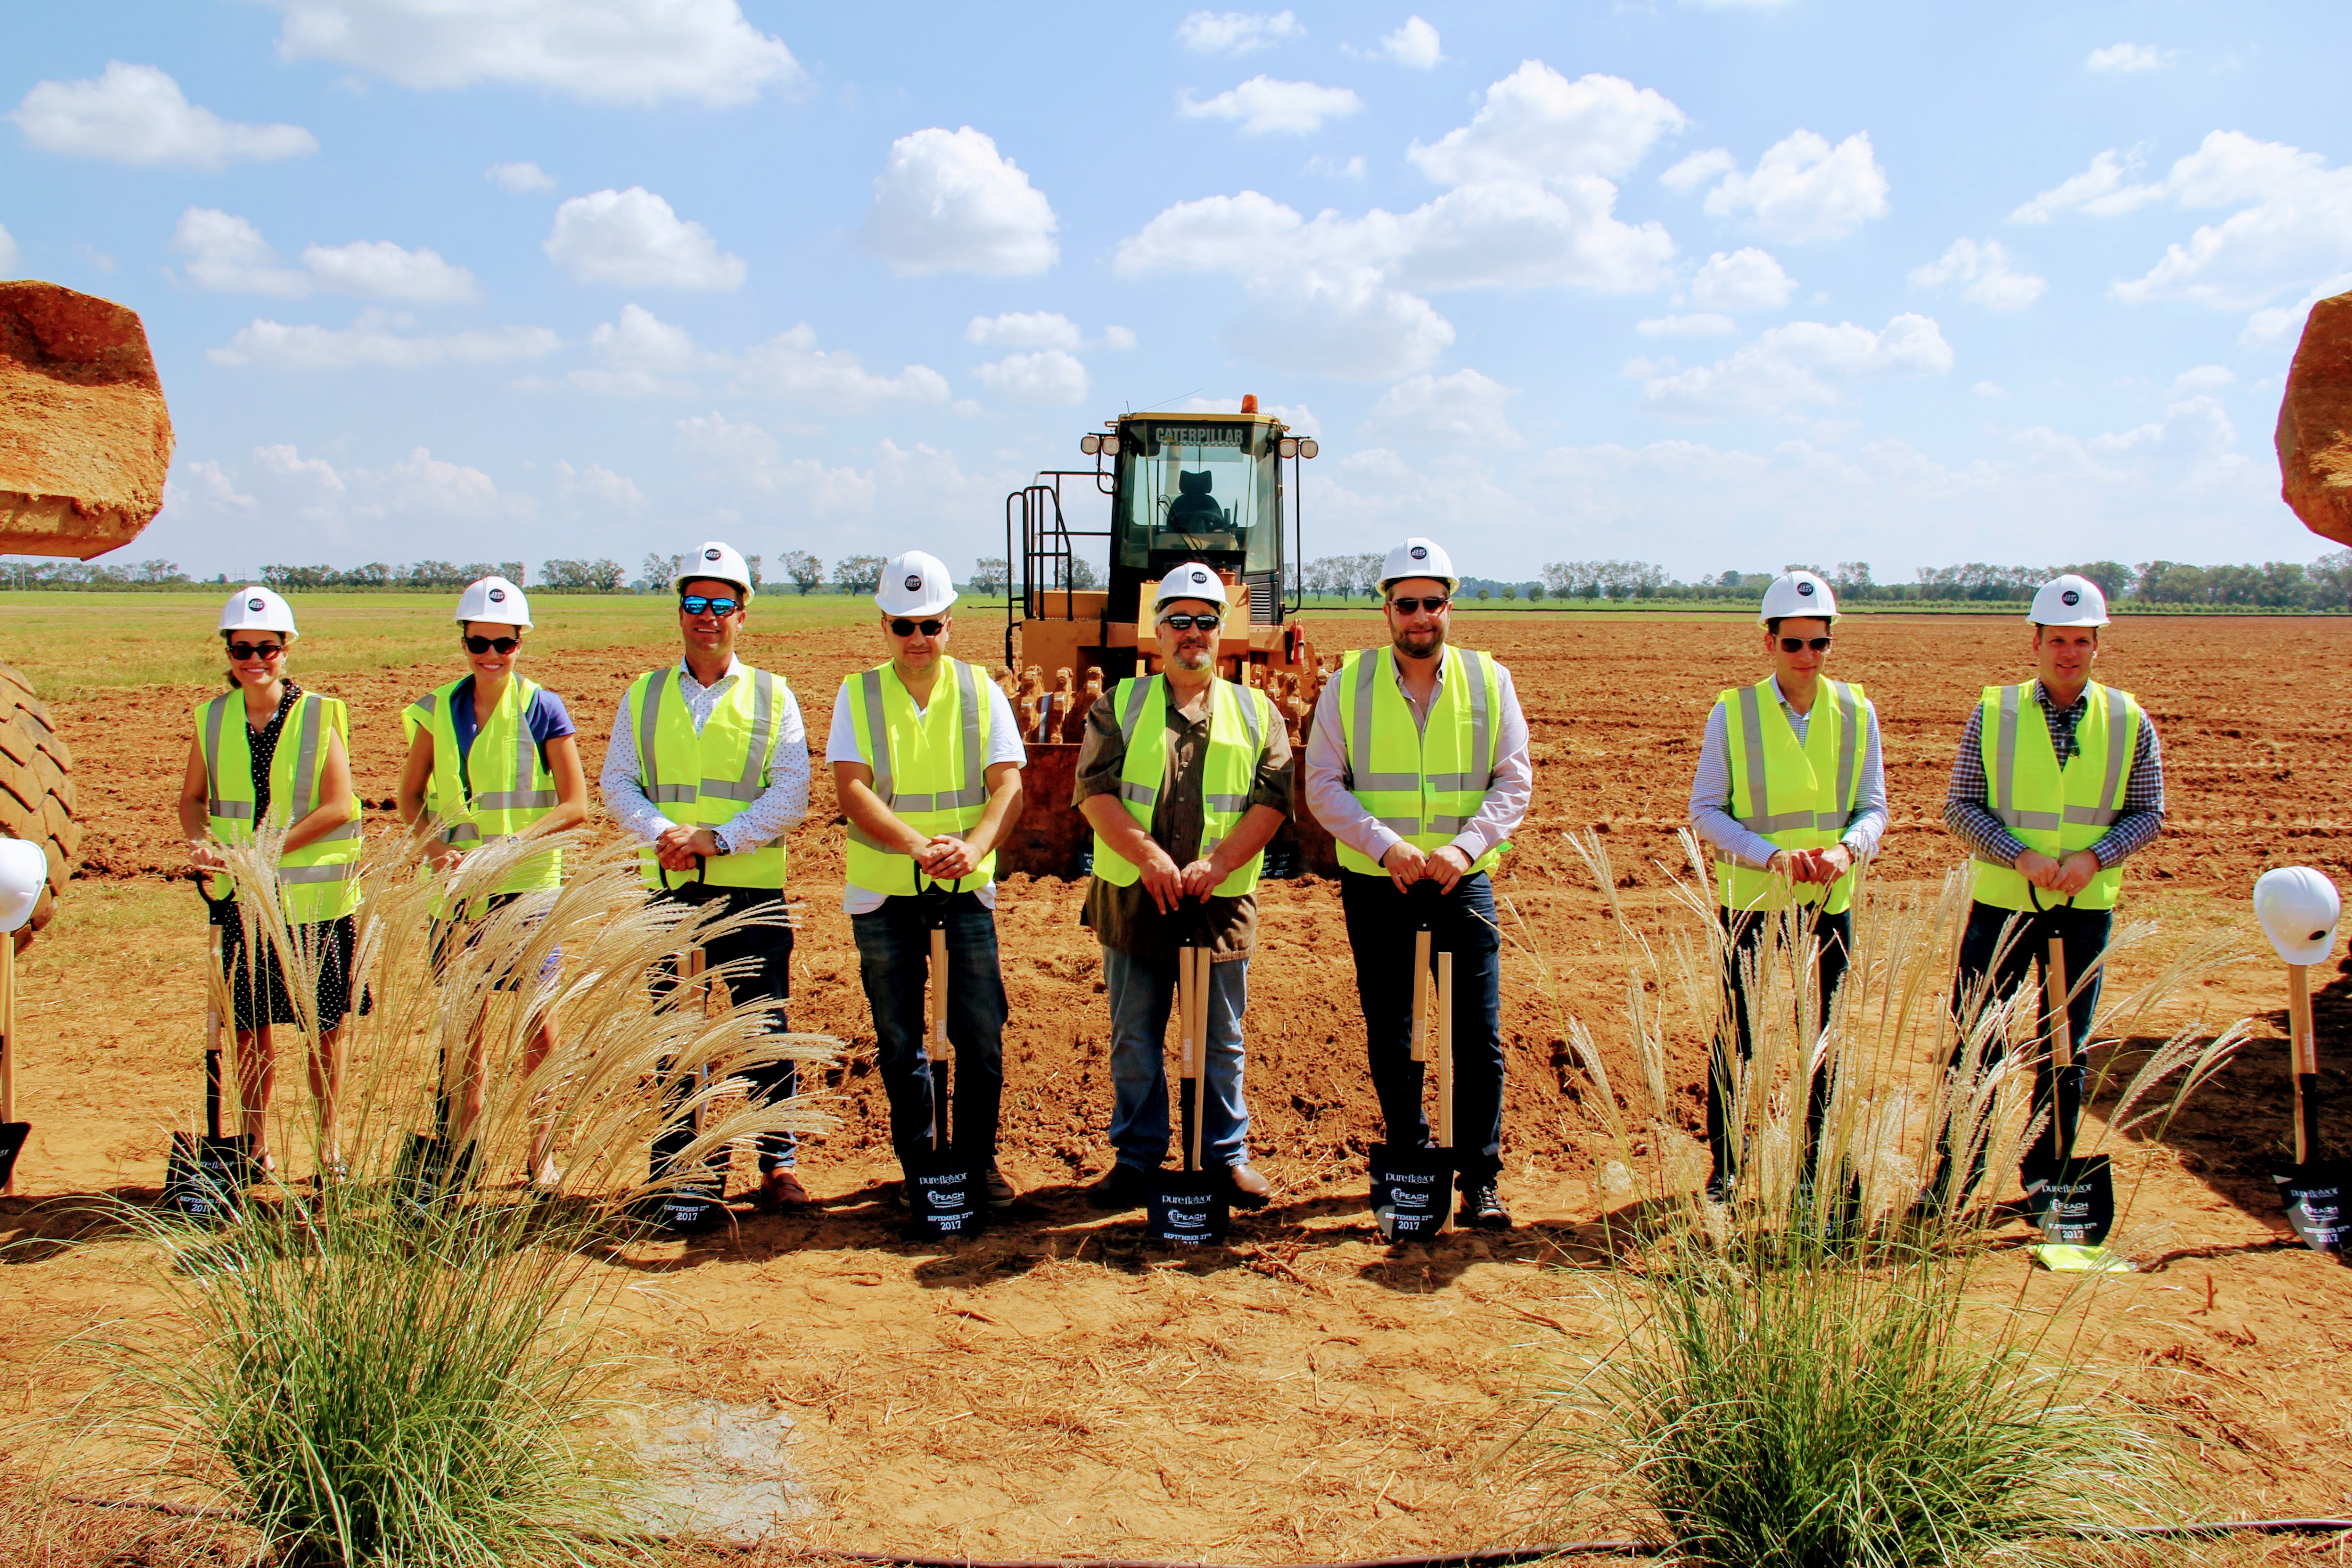 On a beautiful, sunny day, the team that brought Pure Flavor to life in Peach County, Georgia prepares to break ground at the site of what will be a massive greenhouse.  Pictured left to right are Susan Van De Merwe, Sarah Van De Merwe with Blue Forest Environmental Development; Henk Verbakel, CEO, Havecon; Adnan Tonovic, Engineer, Havecon; Joe Moracci, CEO, Pure Flavor; Jamie Moracci, President, Pure Flavor; Jeff Moracci, CFO, Pure Flavor and Matt Mastronardi, EVP, Pure Flavor